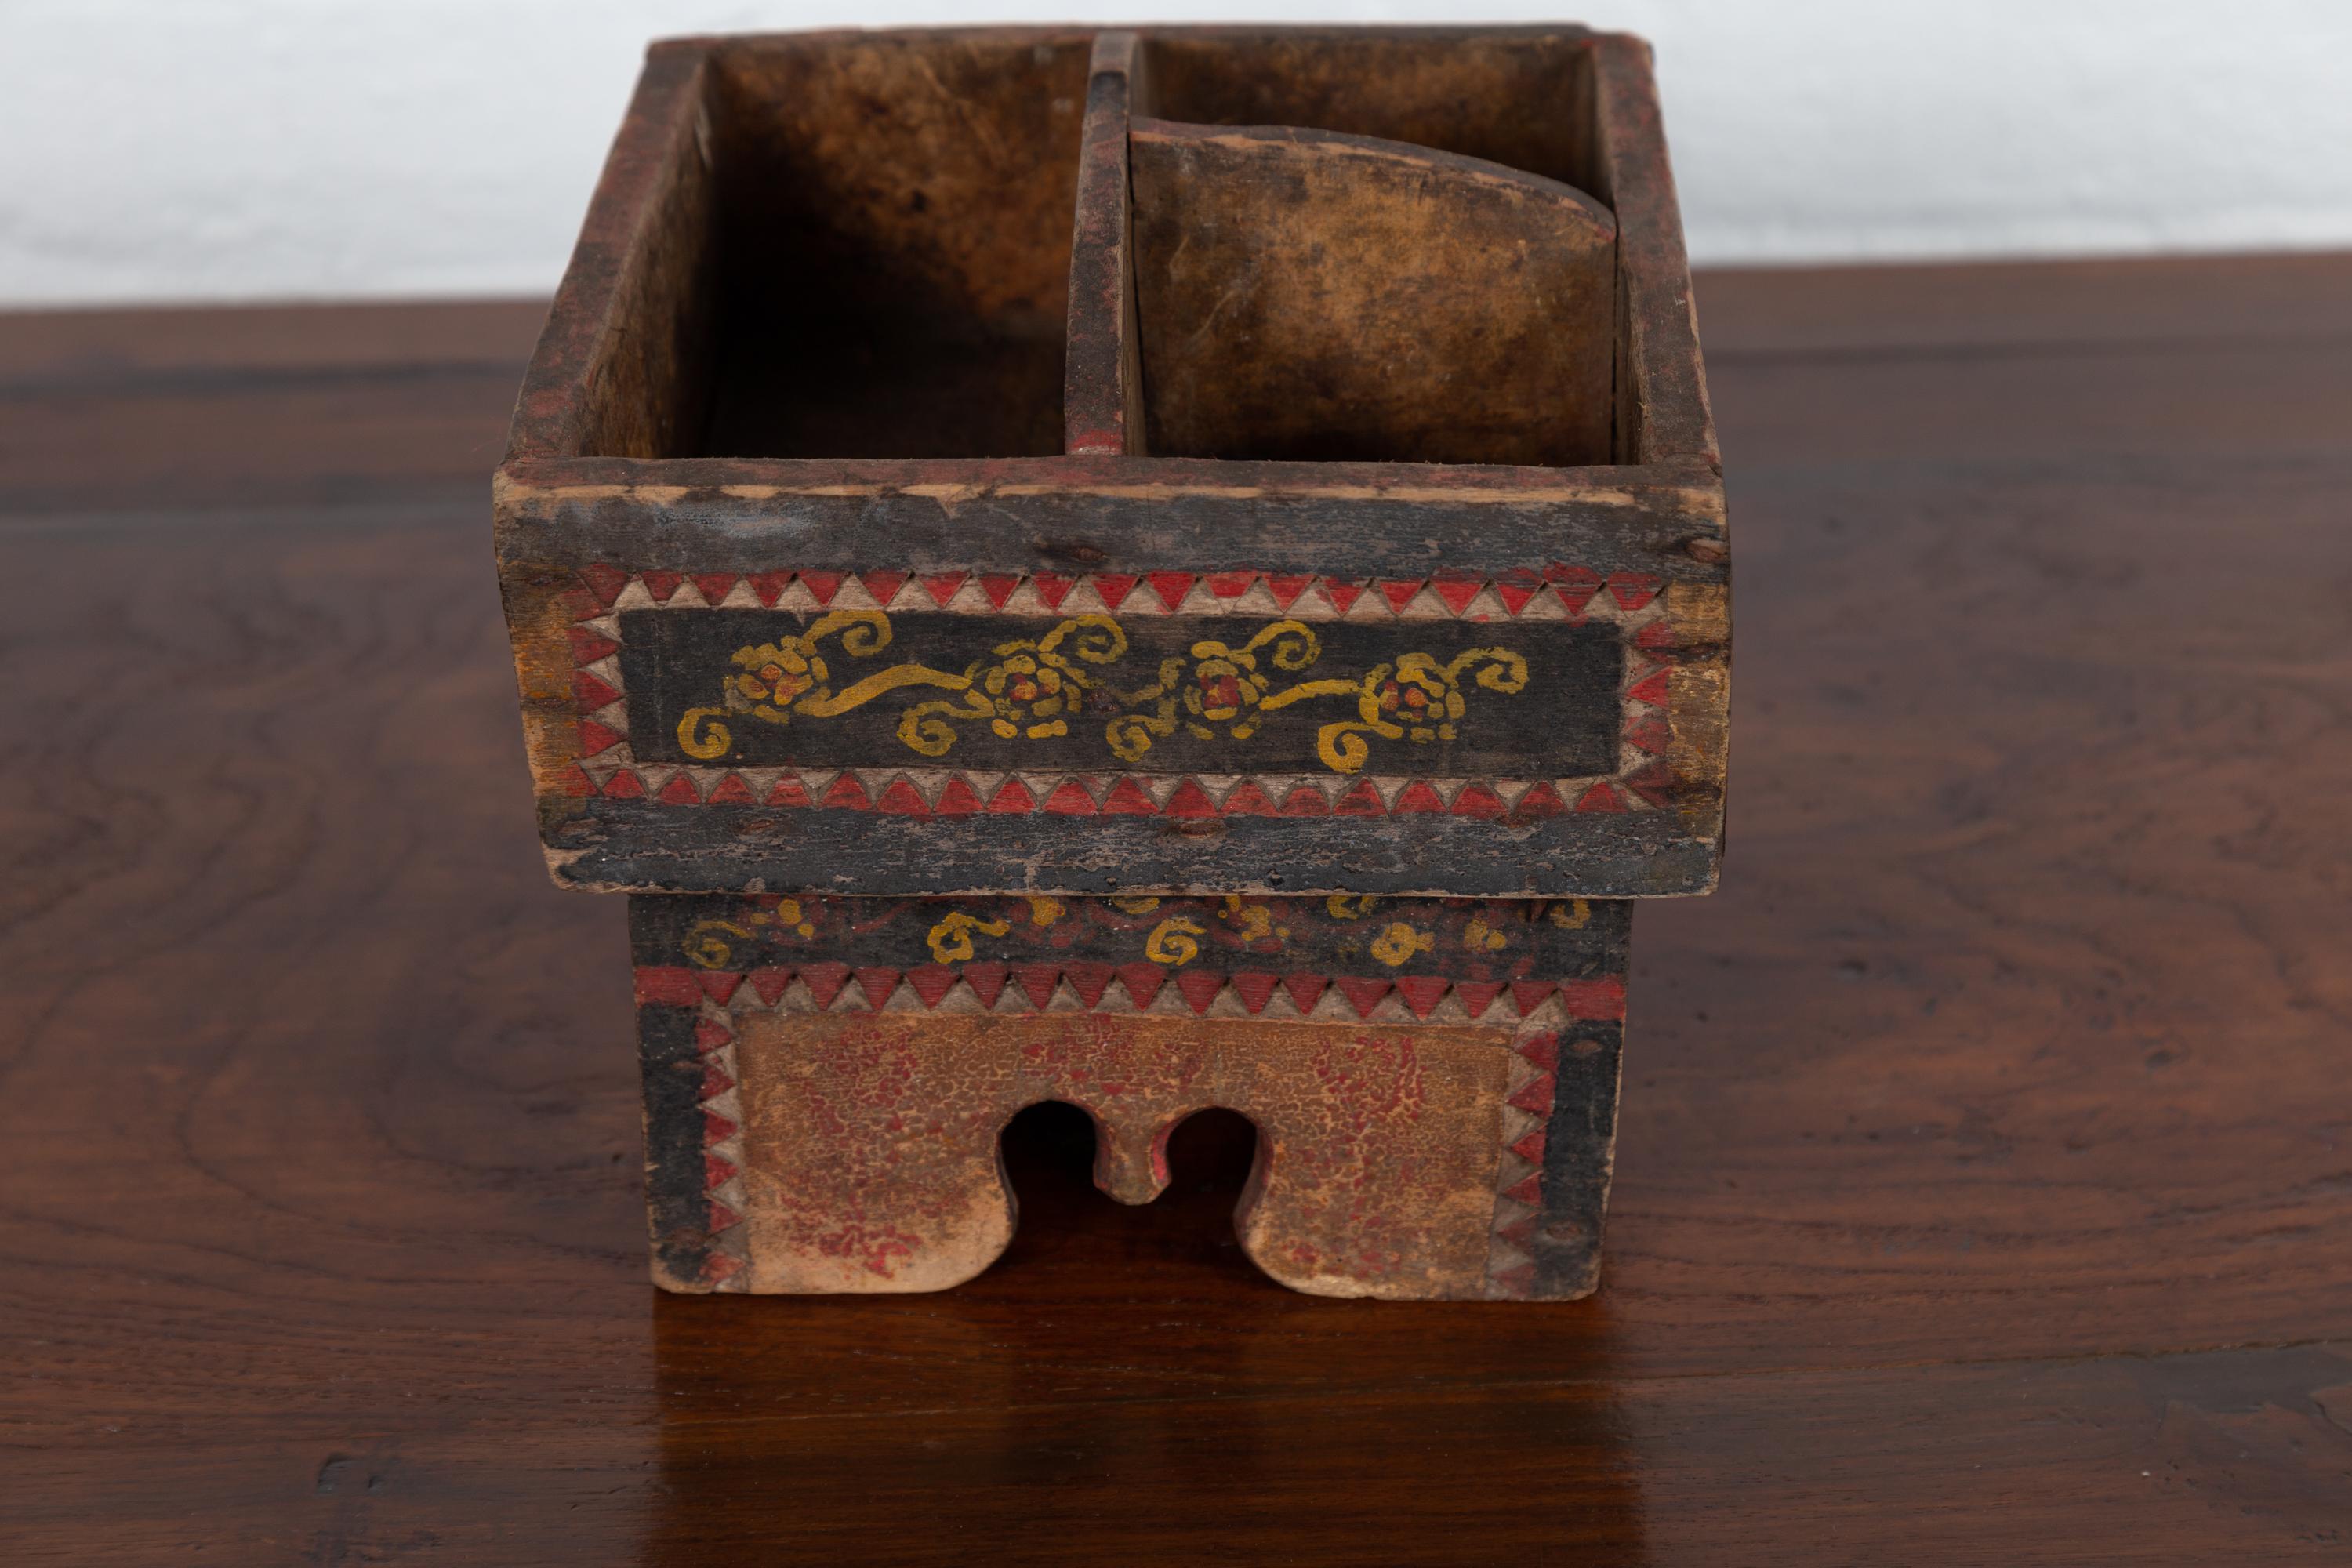 20th Century Petite Thai Rustic Betel Nut Box with Weathered Patina and Painted Décor